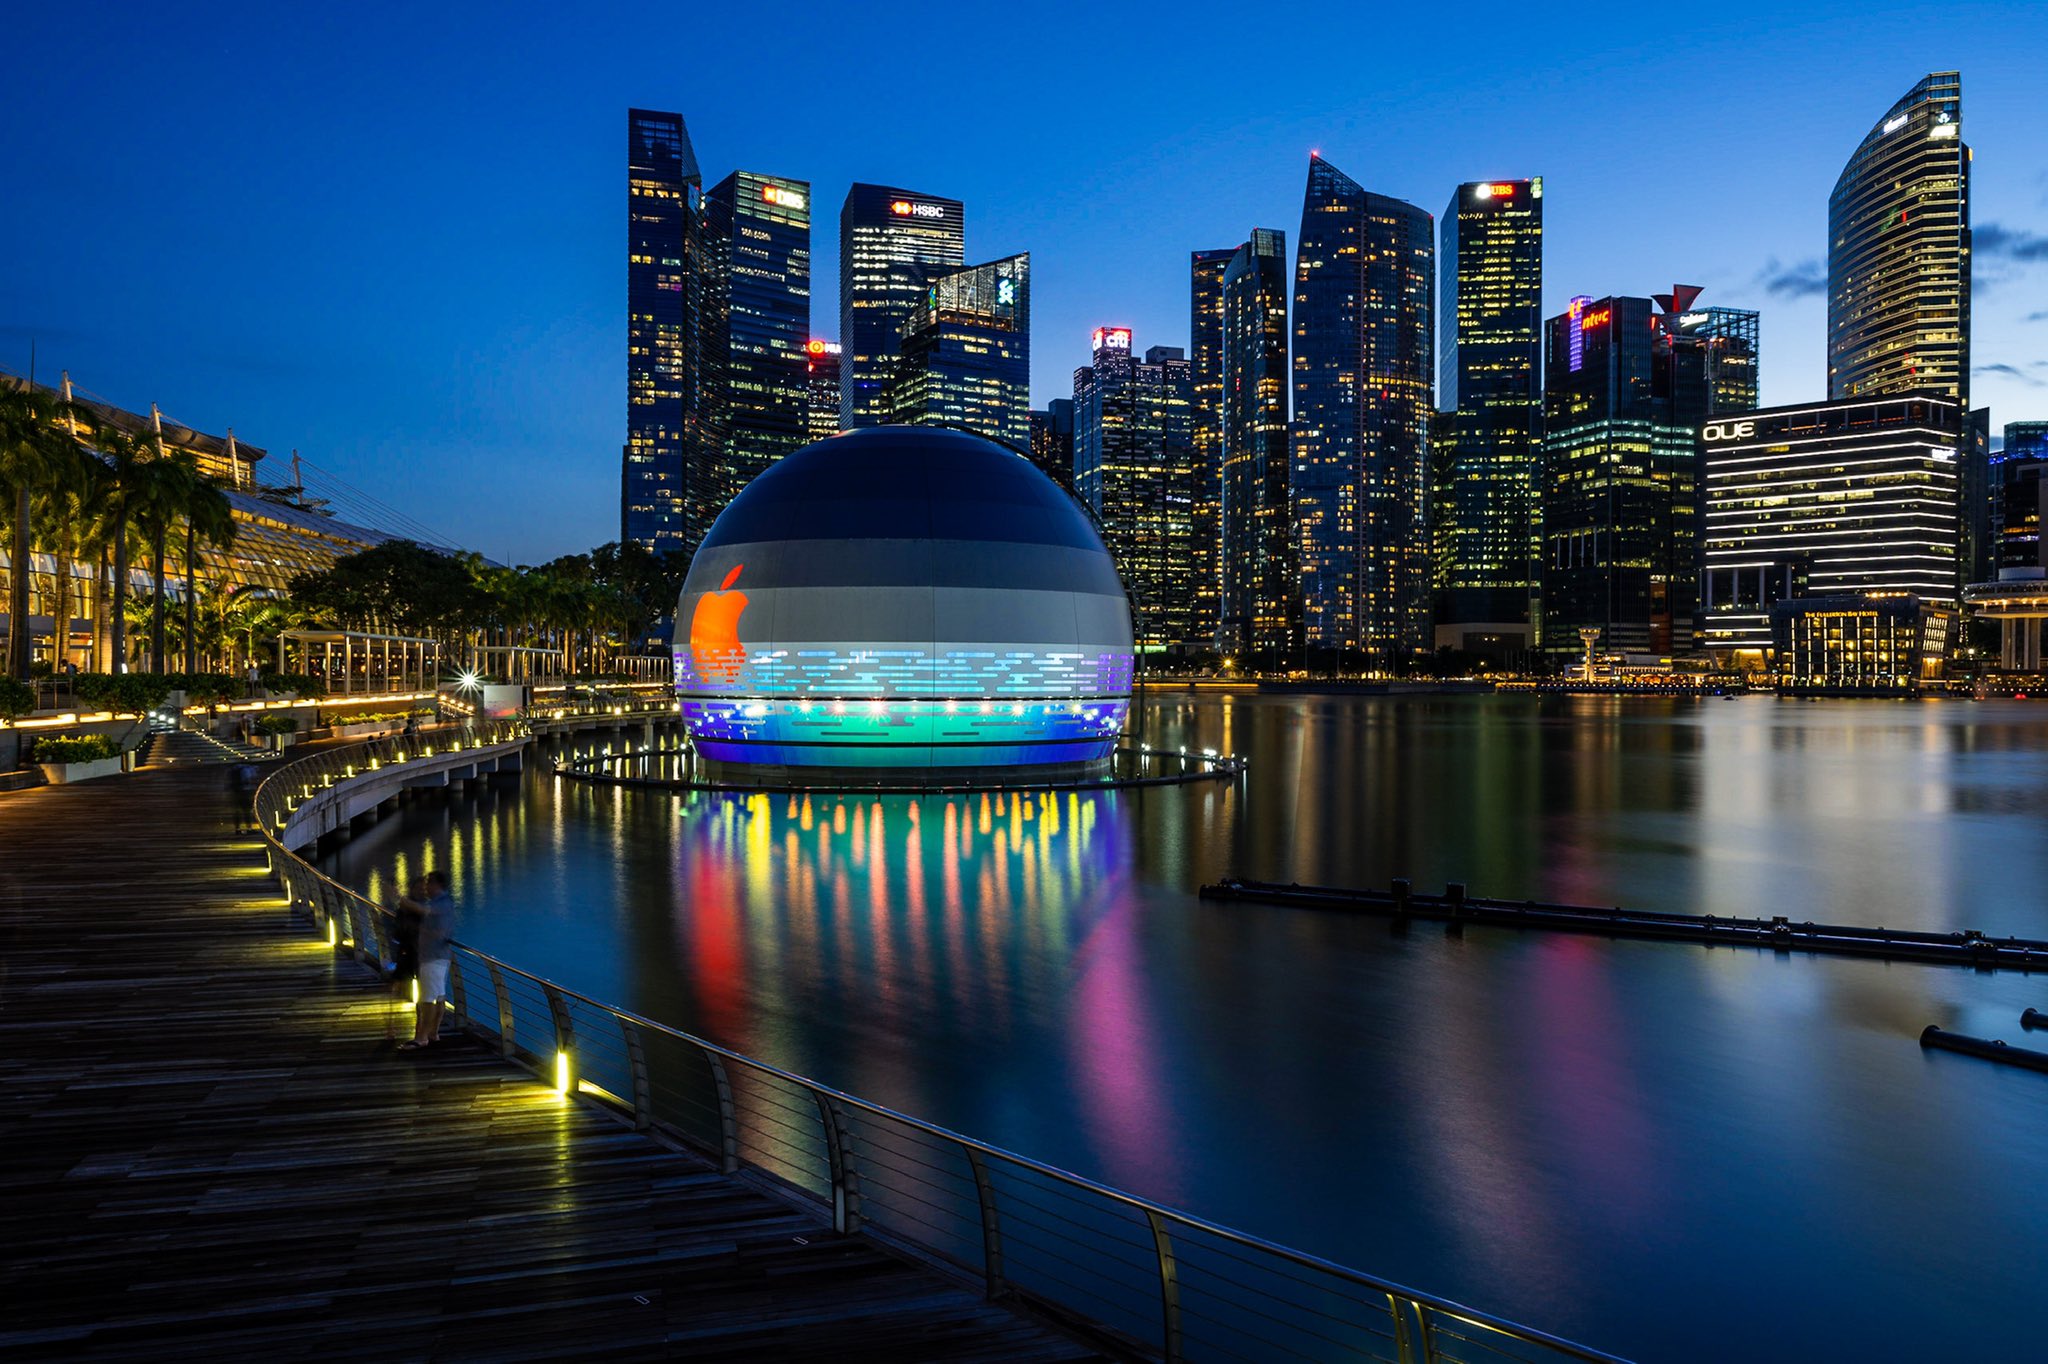 The first Apple store that floats on water opens soon in SIngapore